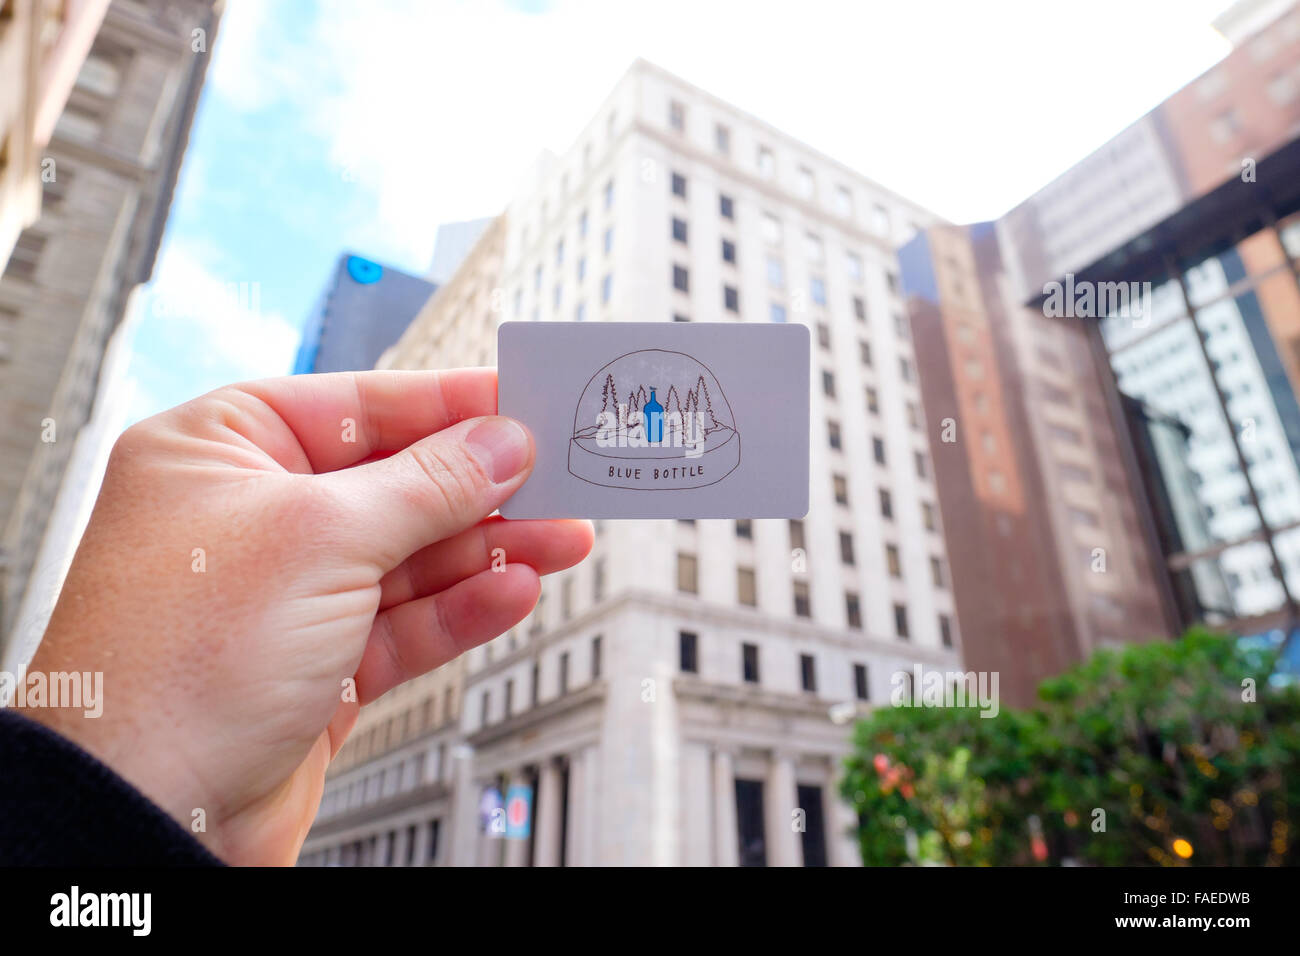 SAN FRANCISCO, CA - DECEMBER 13, 2015: Blue Bottle Coffee gift card held up in hand with downtown buildings in the background. Stock Photo